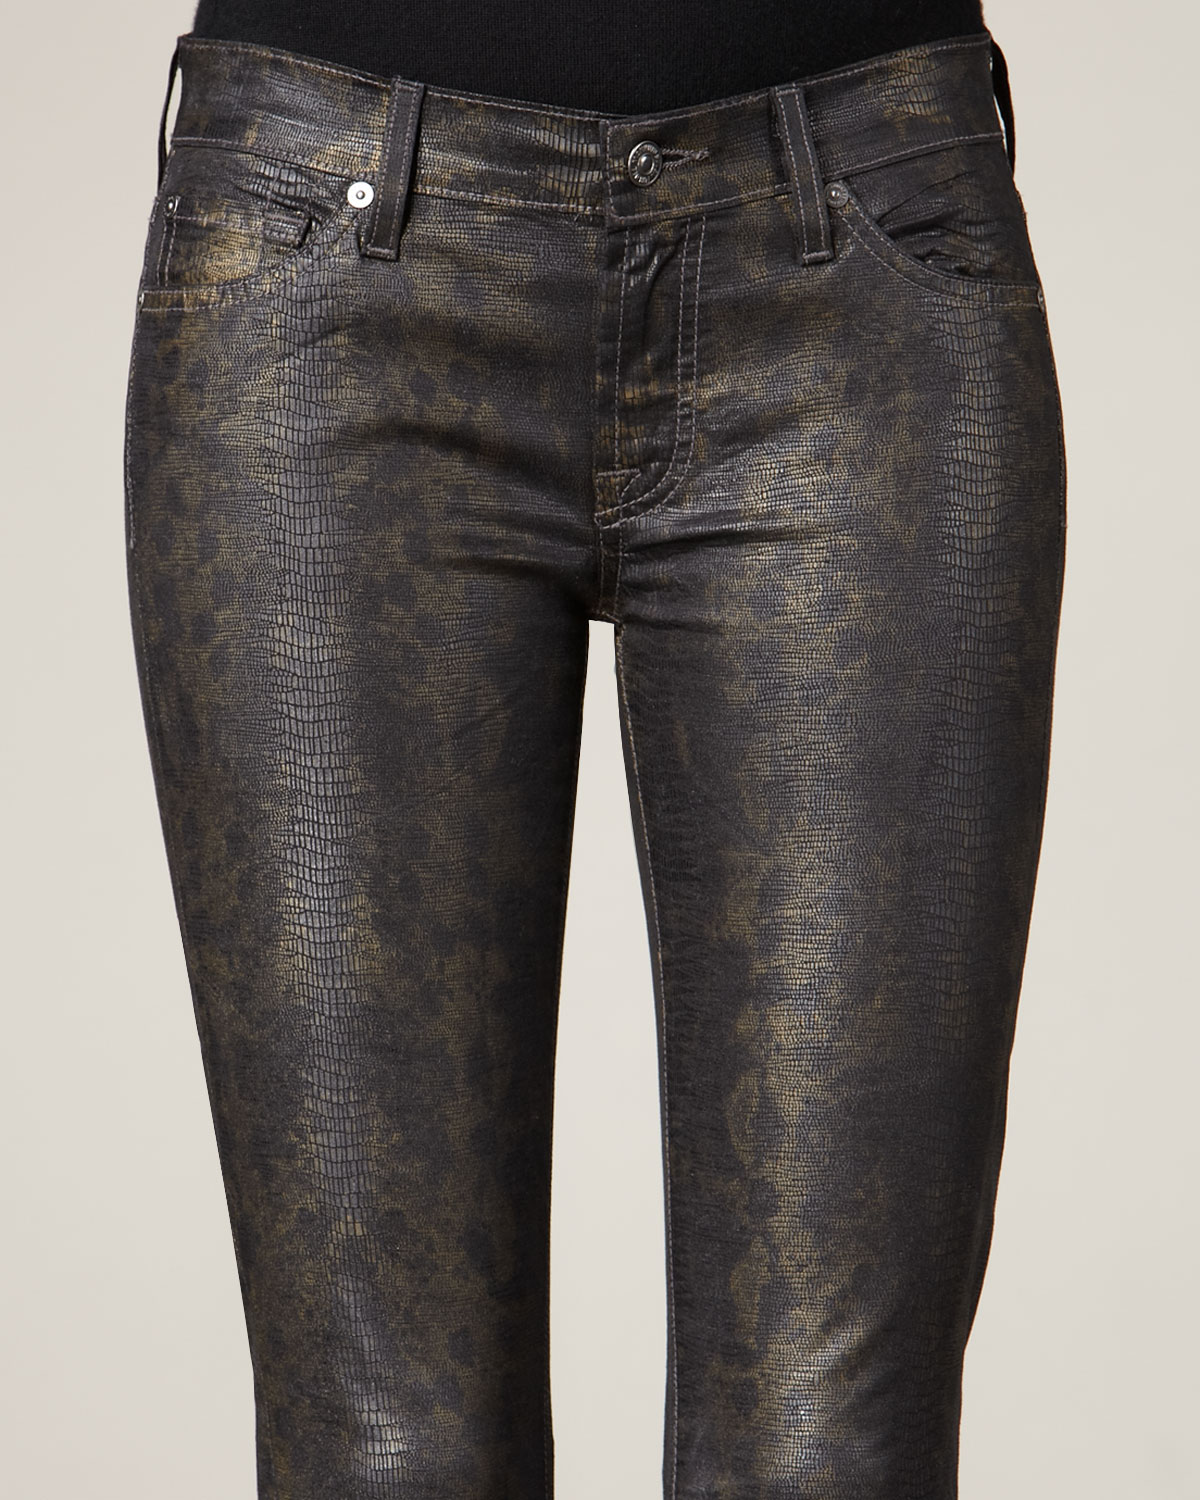 7 for all mankind snakeskin jeans